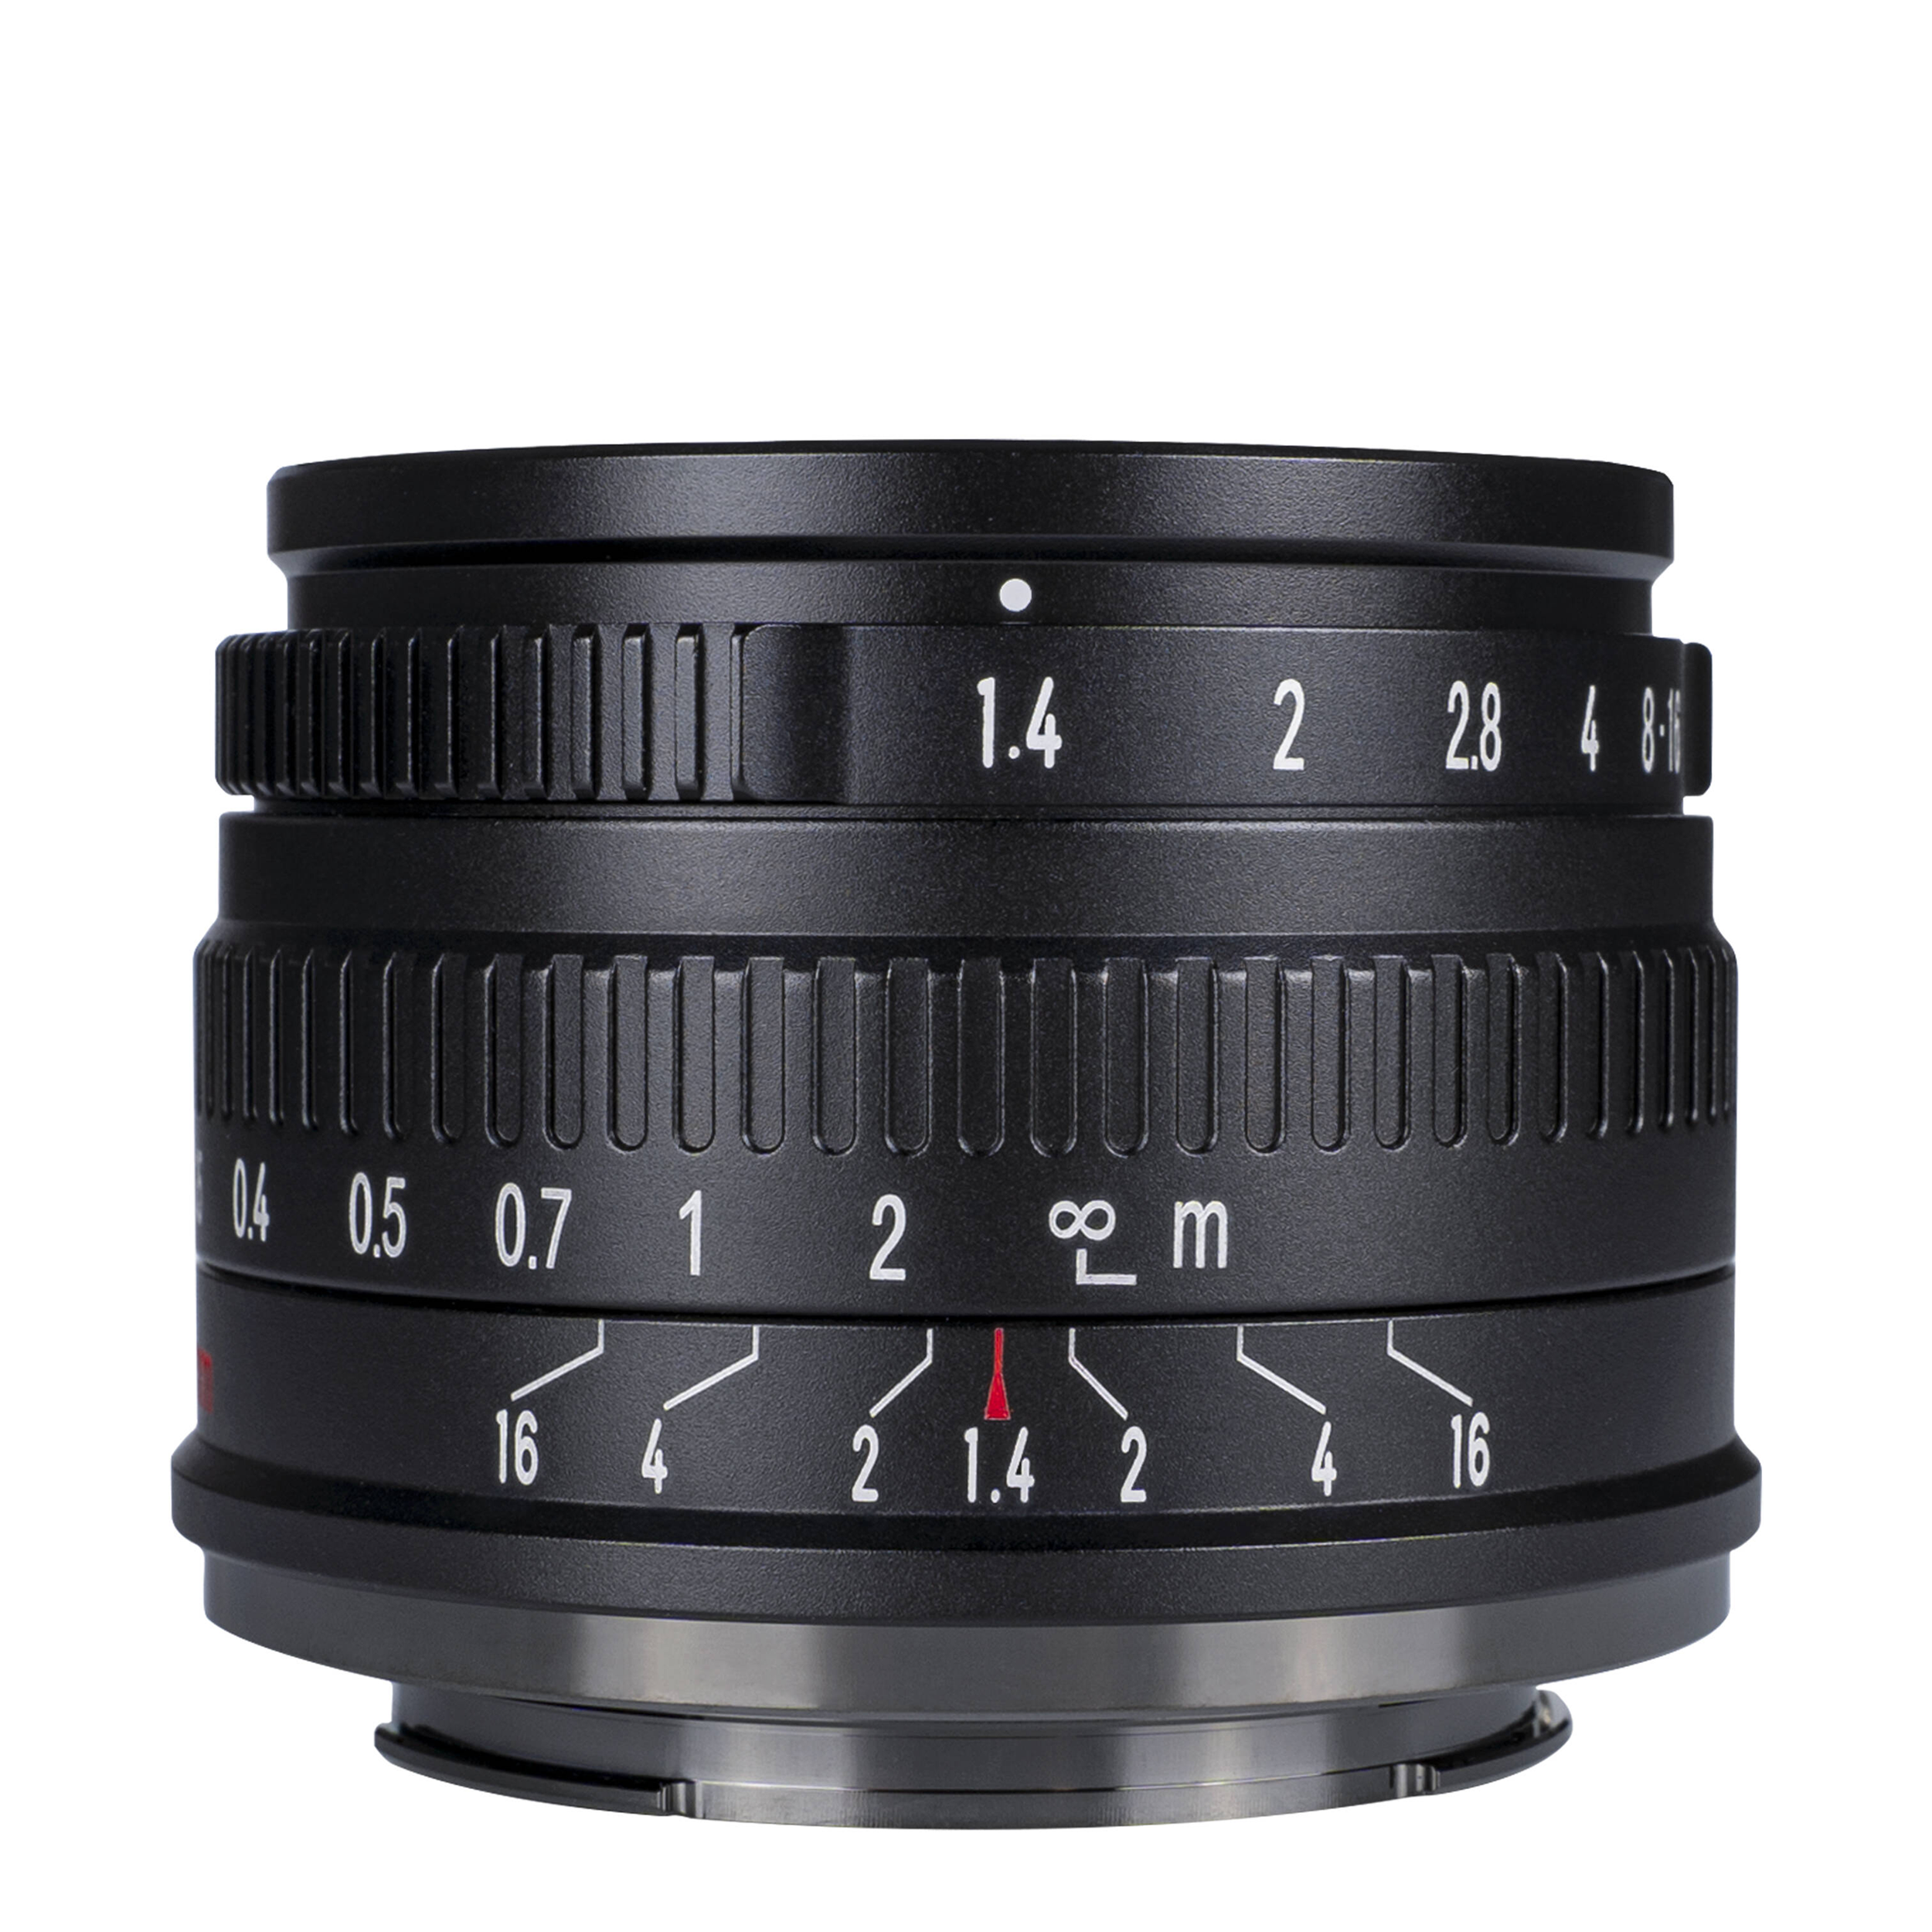 7artisans Photoelectric 35mm f/1.4 Lens for Micro Four Thirds Mount